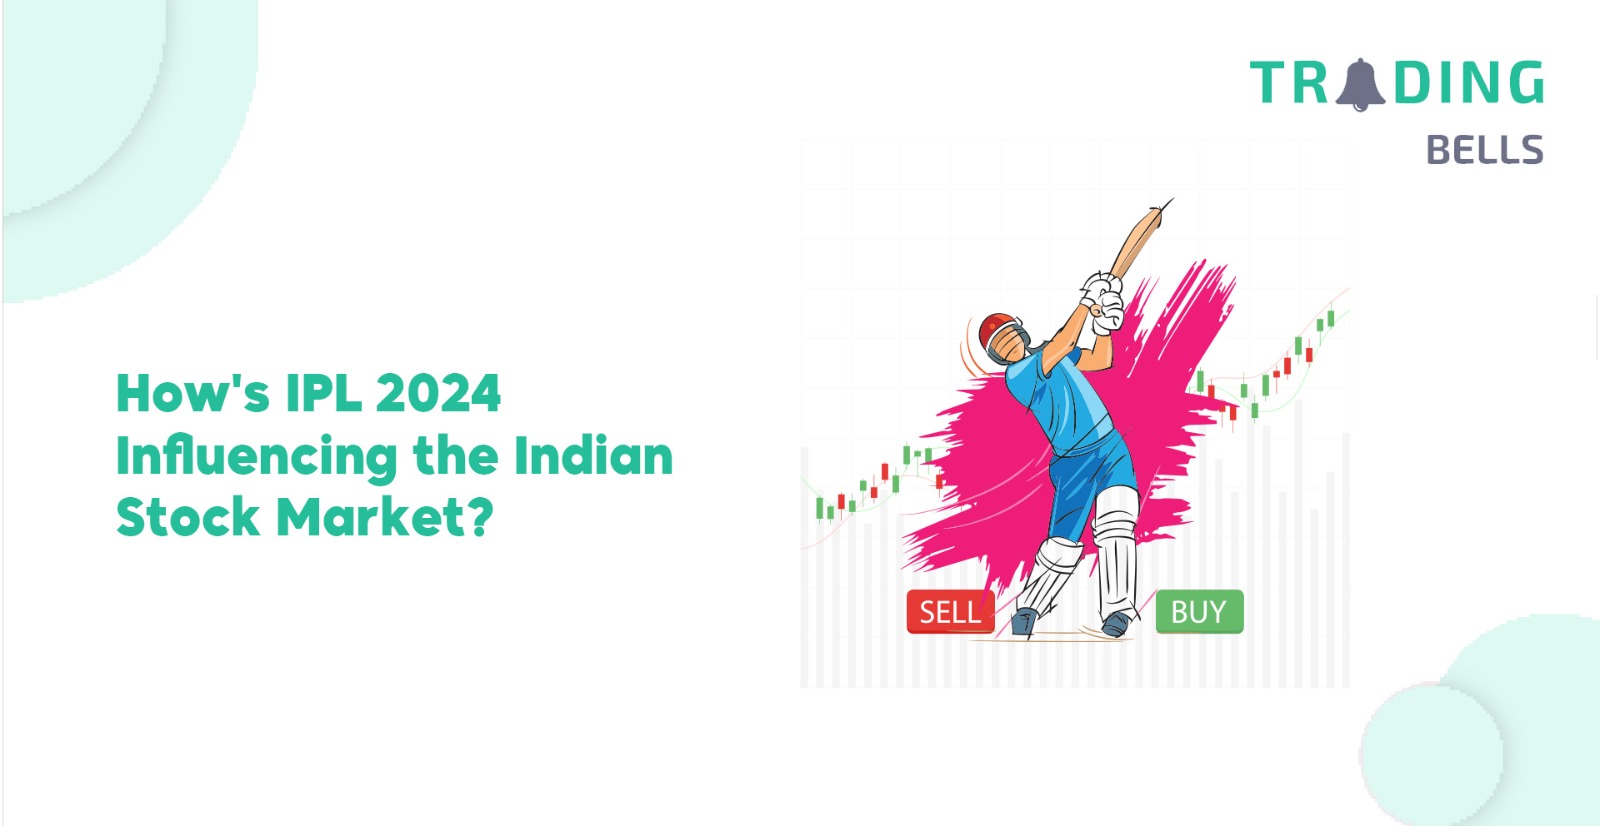 How's IPL 2024 Influencing the Indian Stock Market